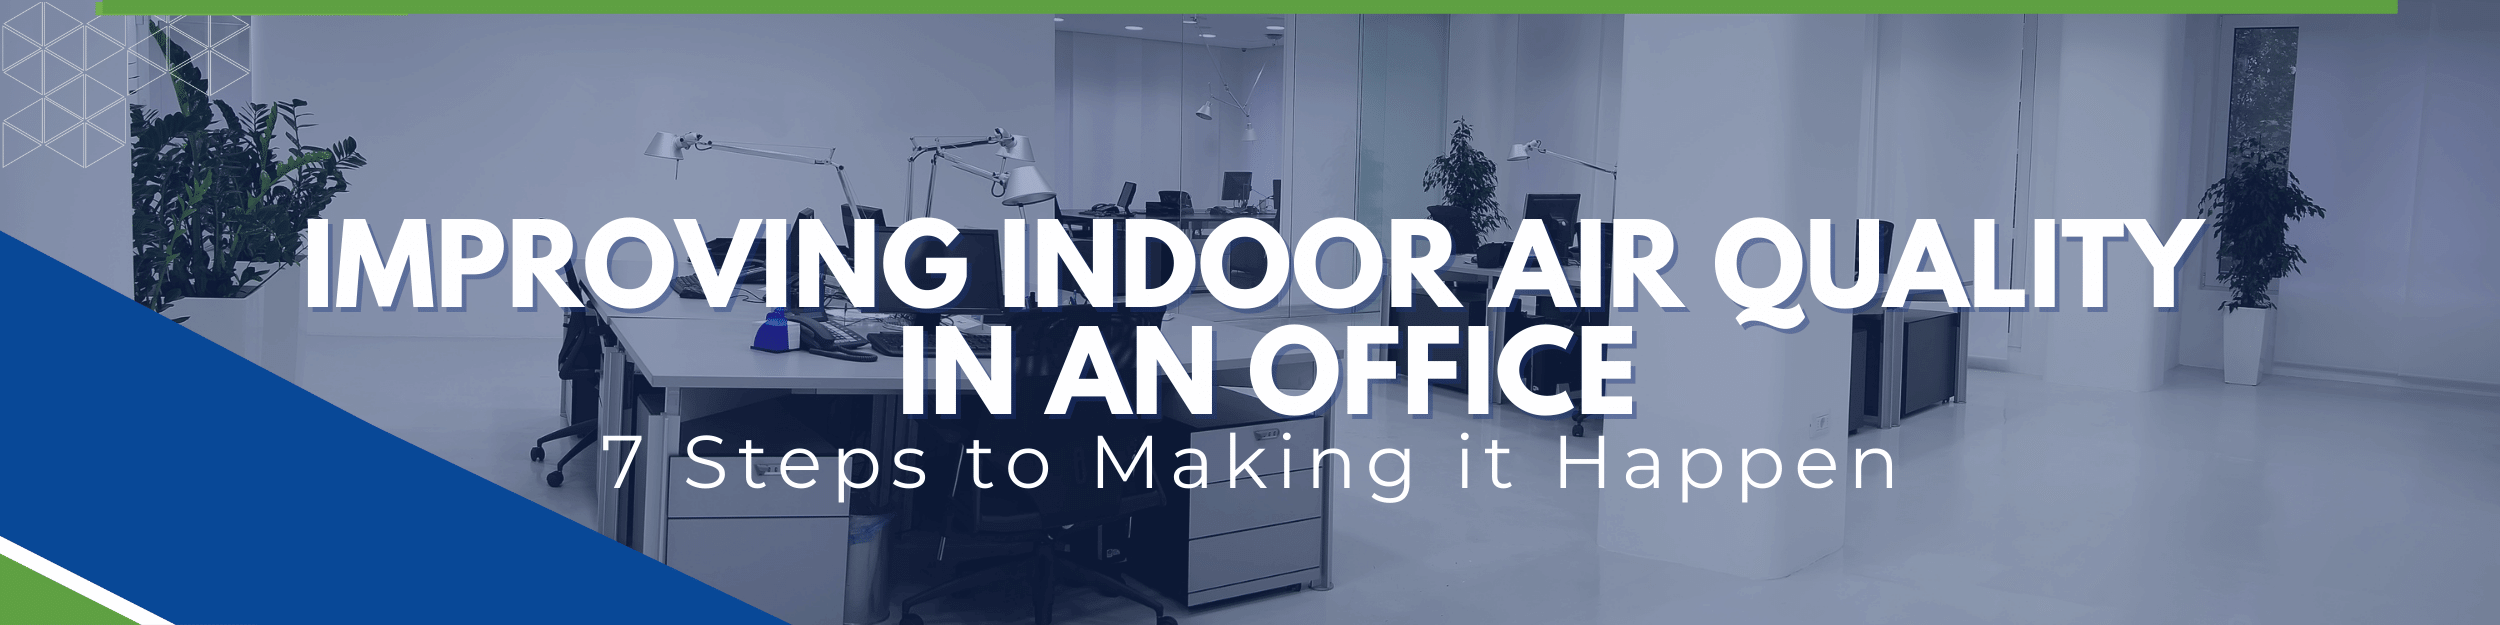 Improving Indoor Air Quality - 7 Steps to Making it Happen - banner